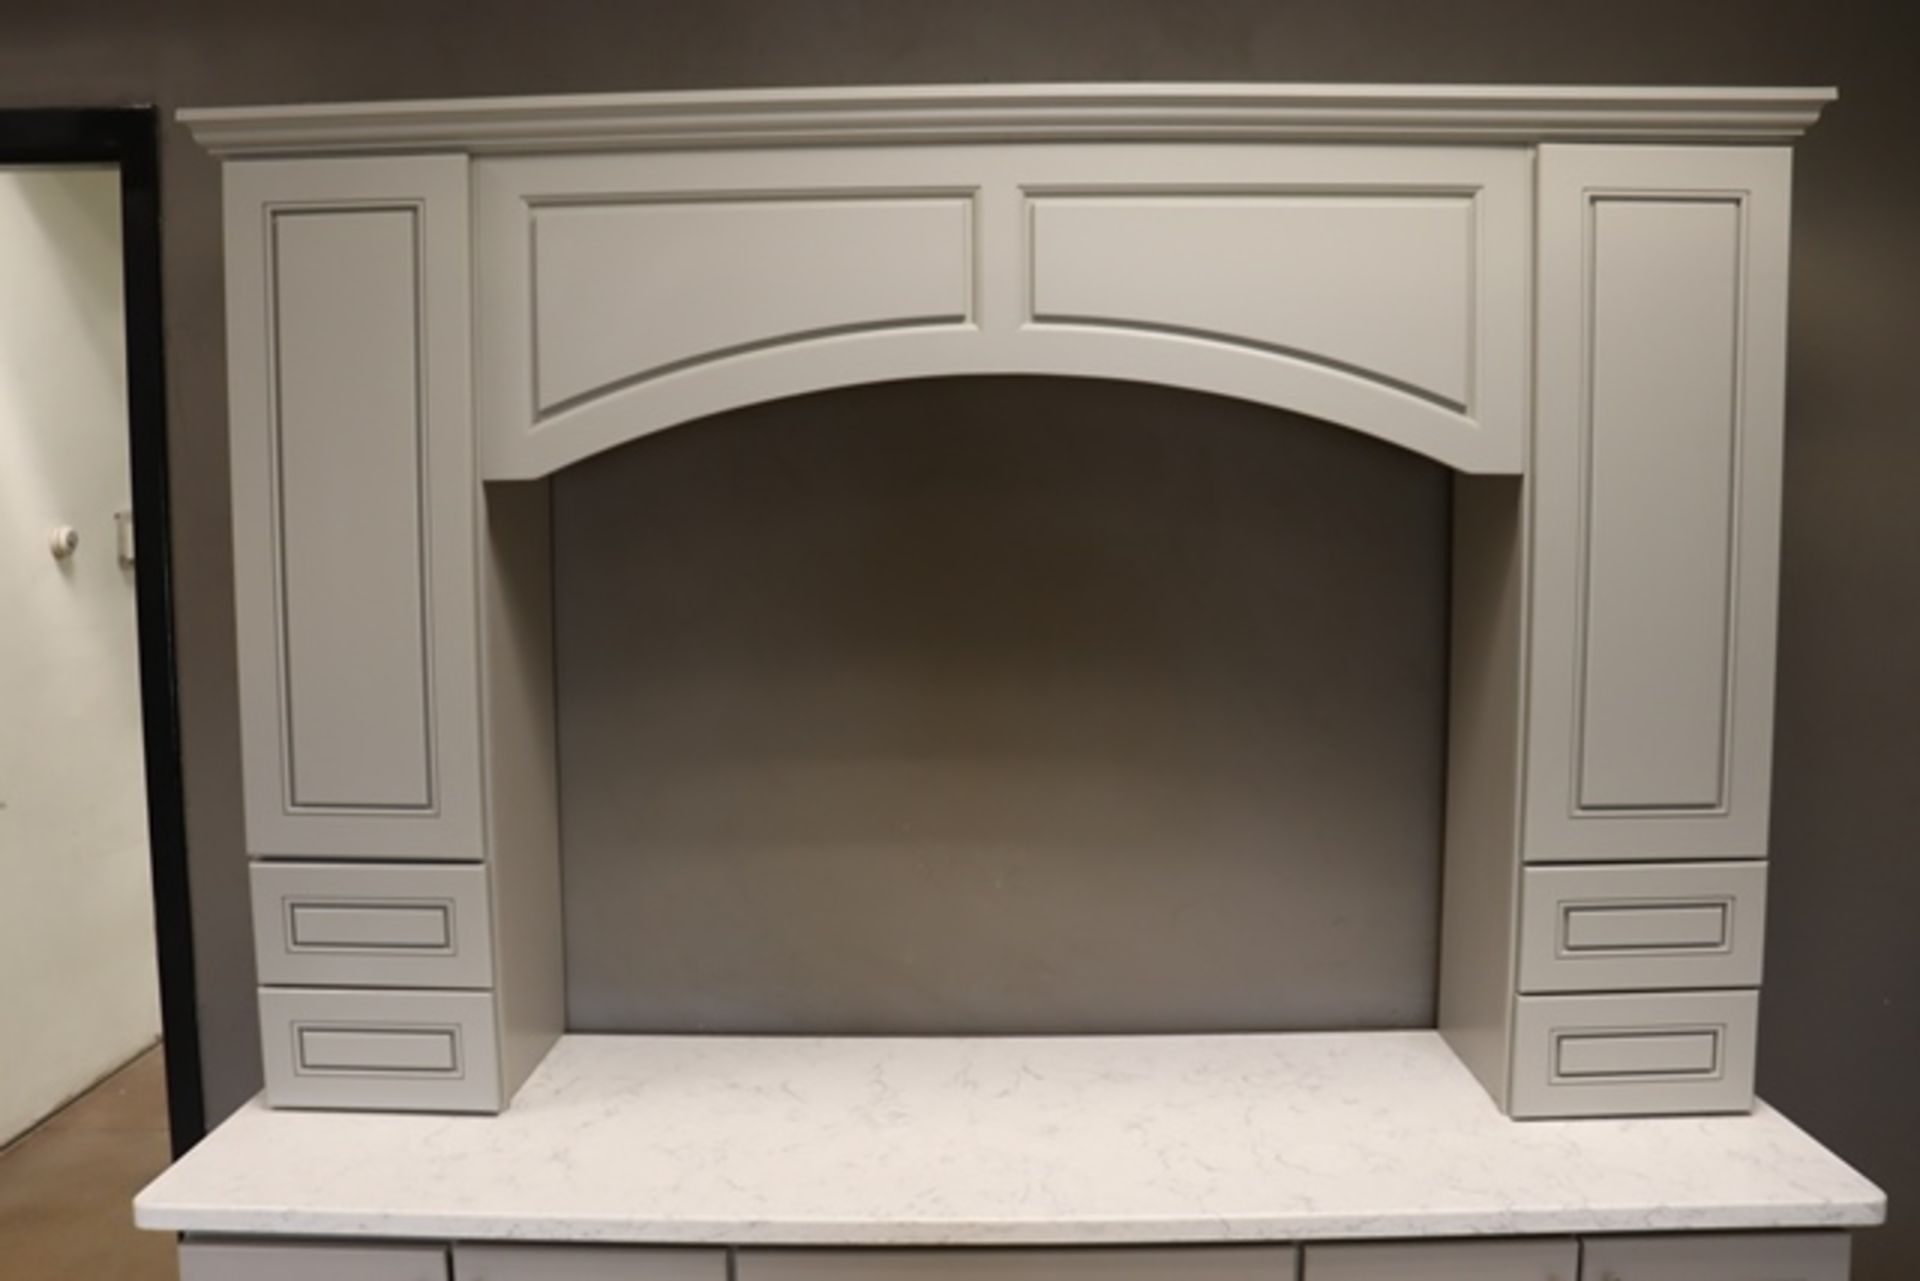 22.5" x 74" x 84" tall wall decorative cabinet with upper cabinet & white g - Image 3 of 5